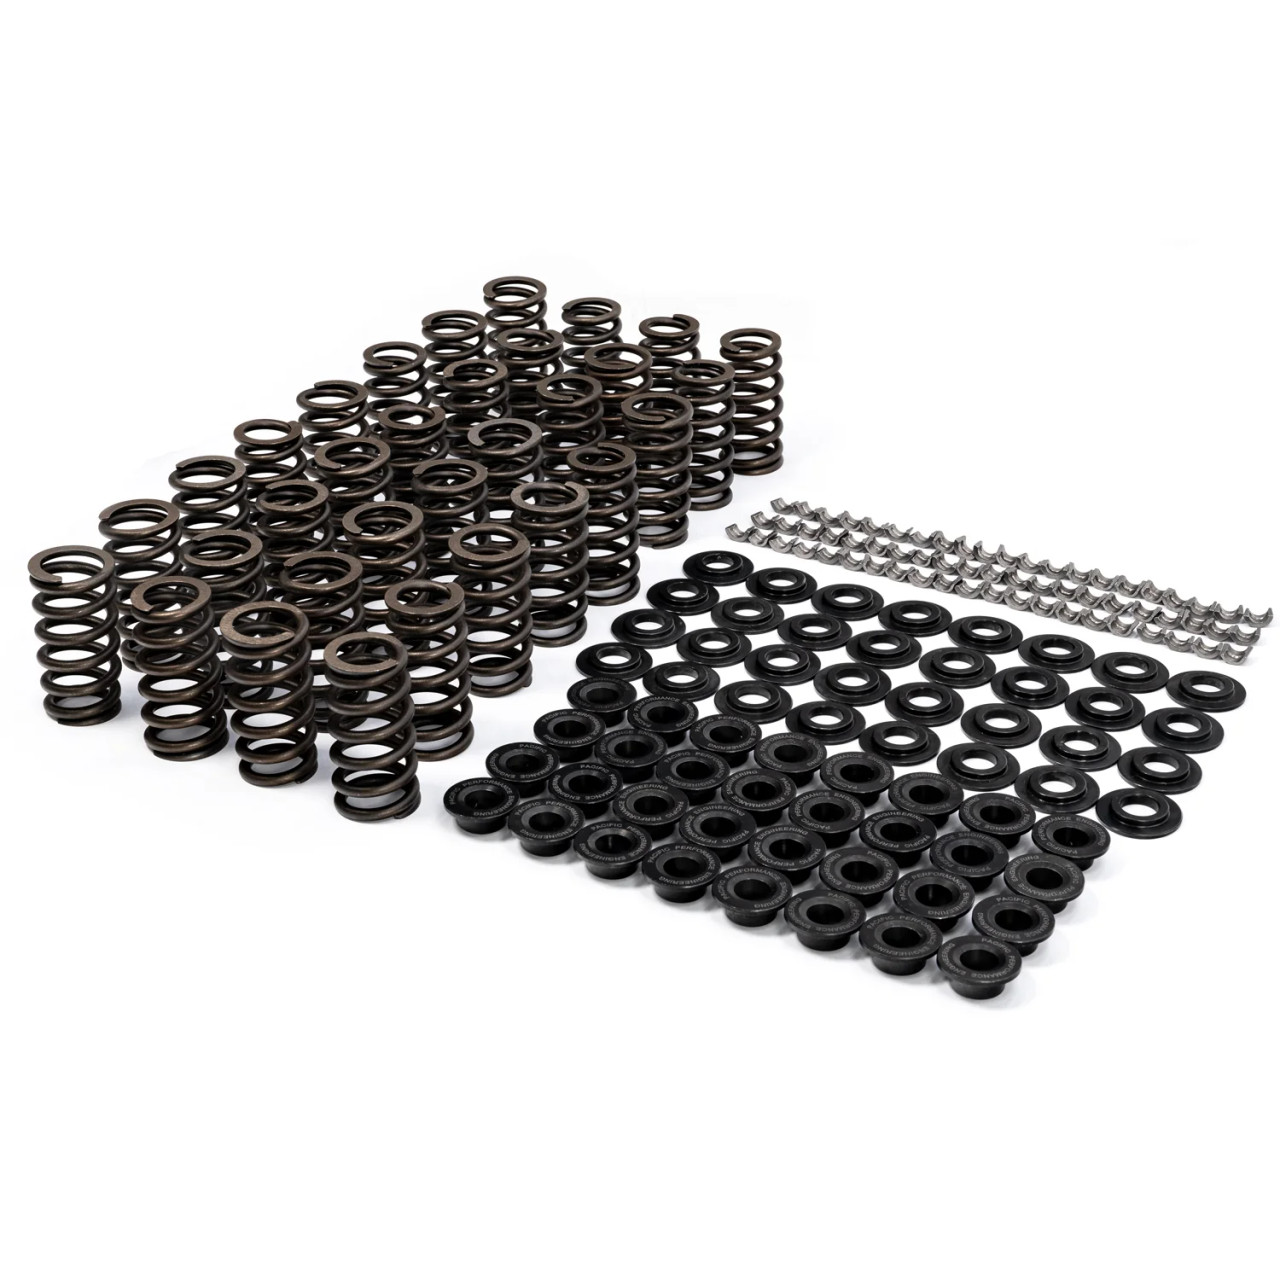 PPE Valve Springs, Retainers, and Keepers Complete Kit for 2001 to 2016 6.L Duramax (110090050)New View